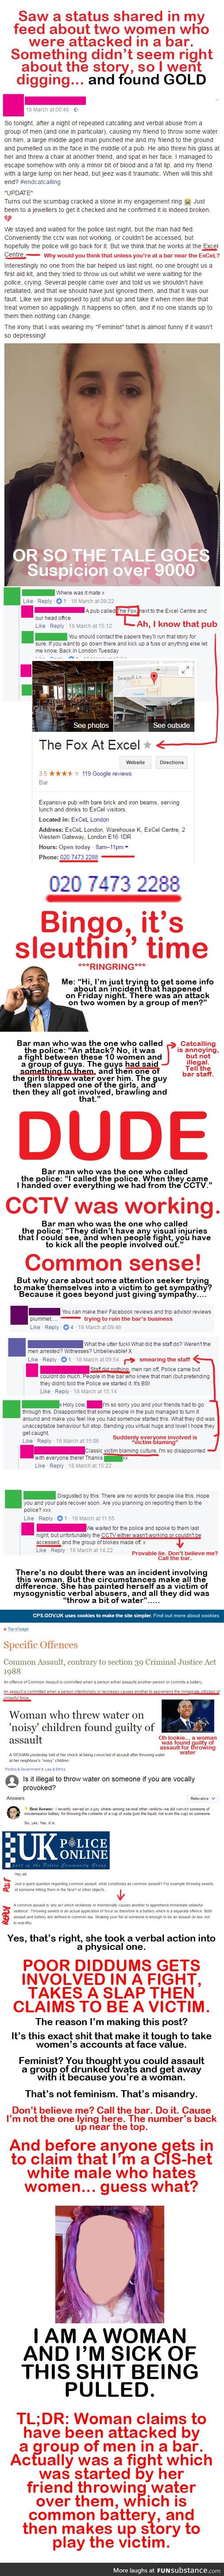 Feminist claims to have been attacked by a group of men, caught out lying